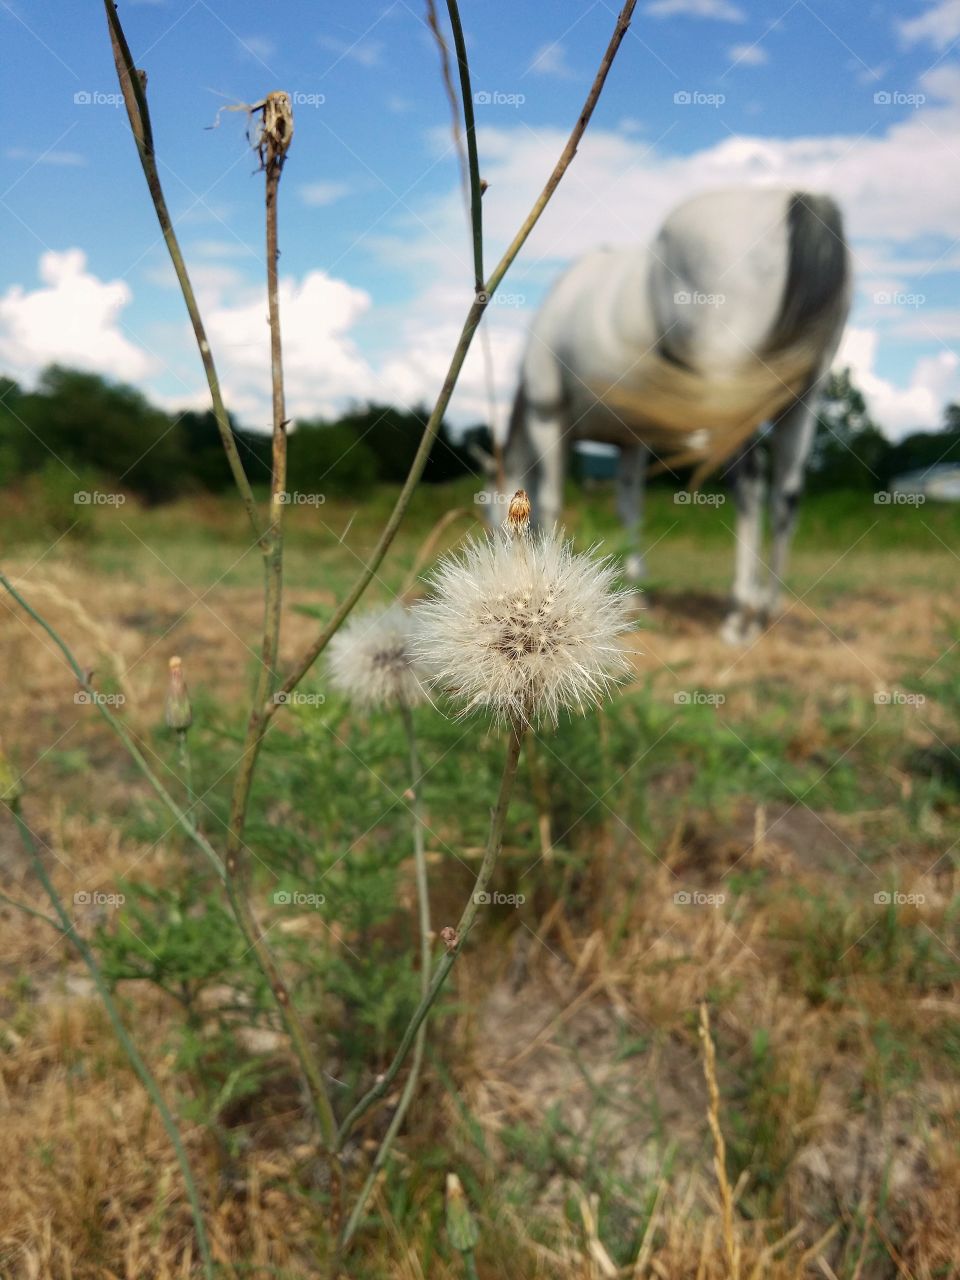 It's summertime in Texas a dandelion growing in a pasture with a horse grazing behind it with a blue cloudy sky